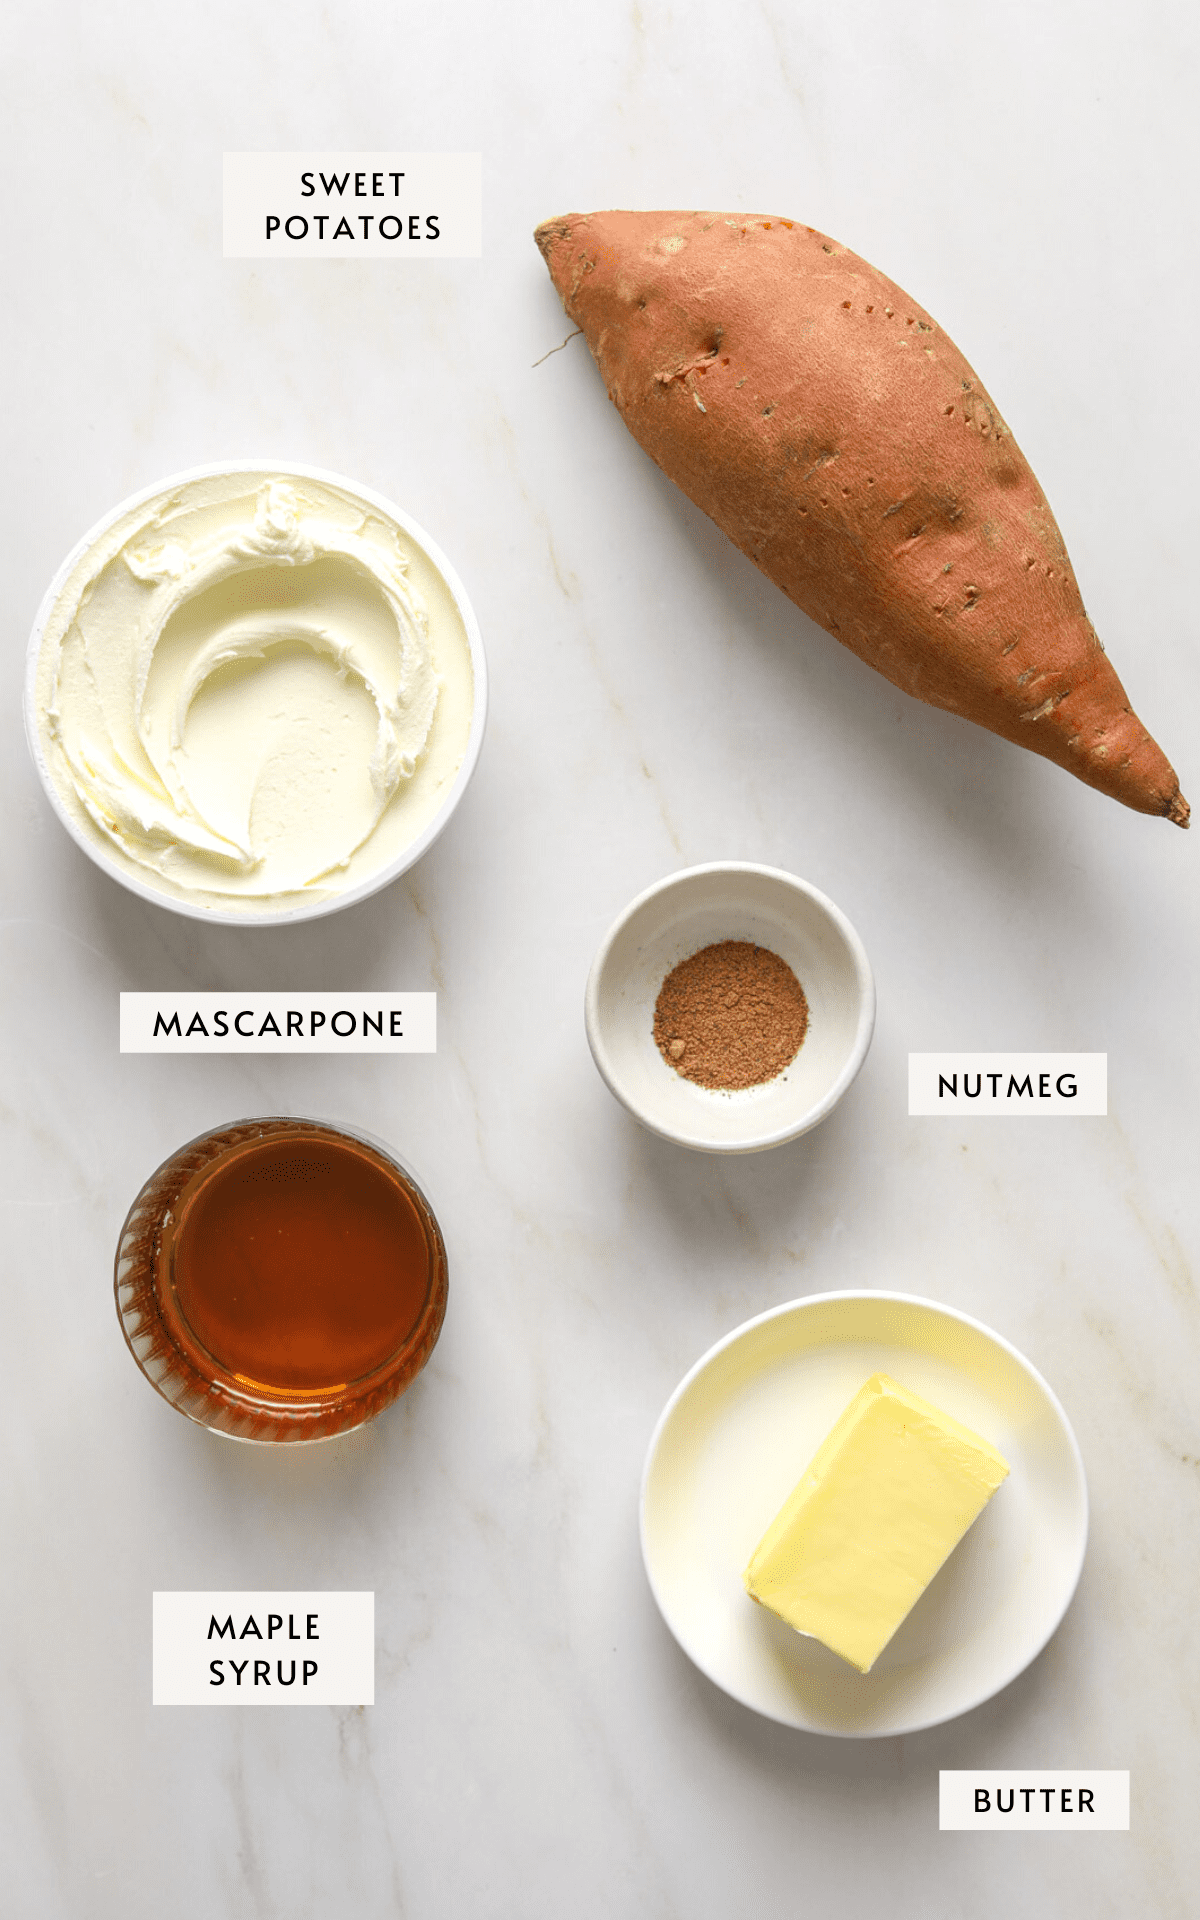 A marble table top with one sweet potato, a container of mascarpone cheese, a small glass dish of maple syrup, a stick of butter and a small dish of ground nutmeg.